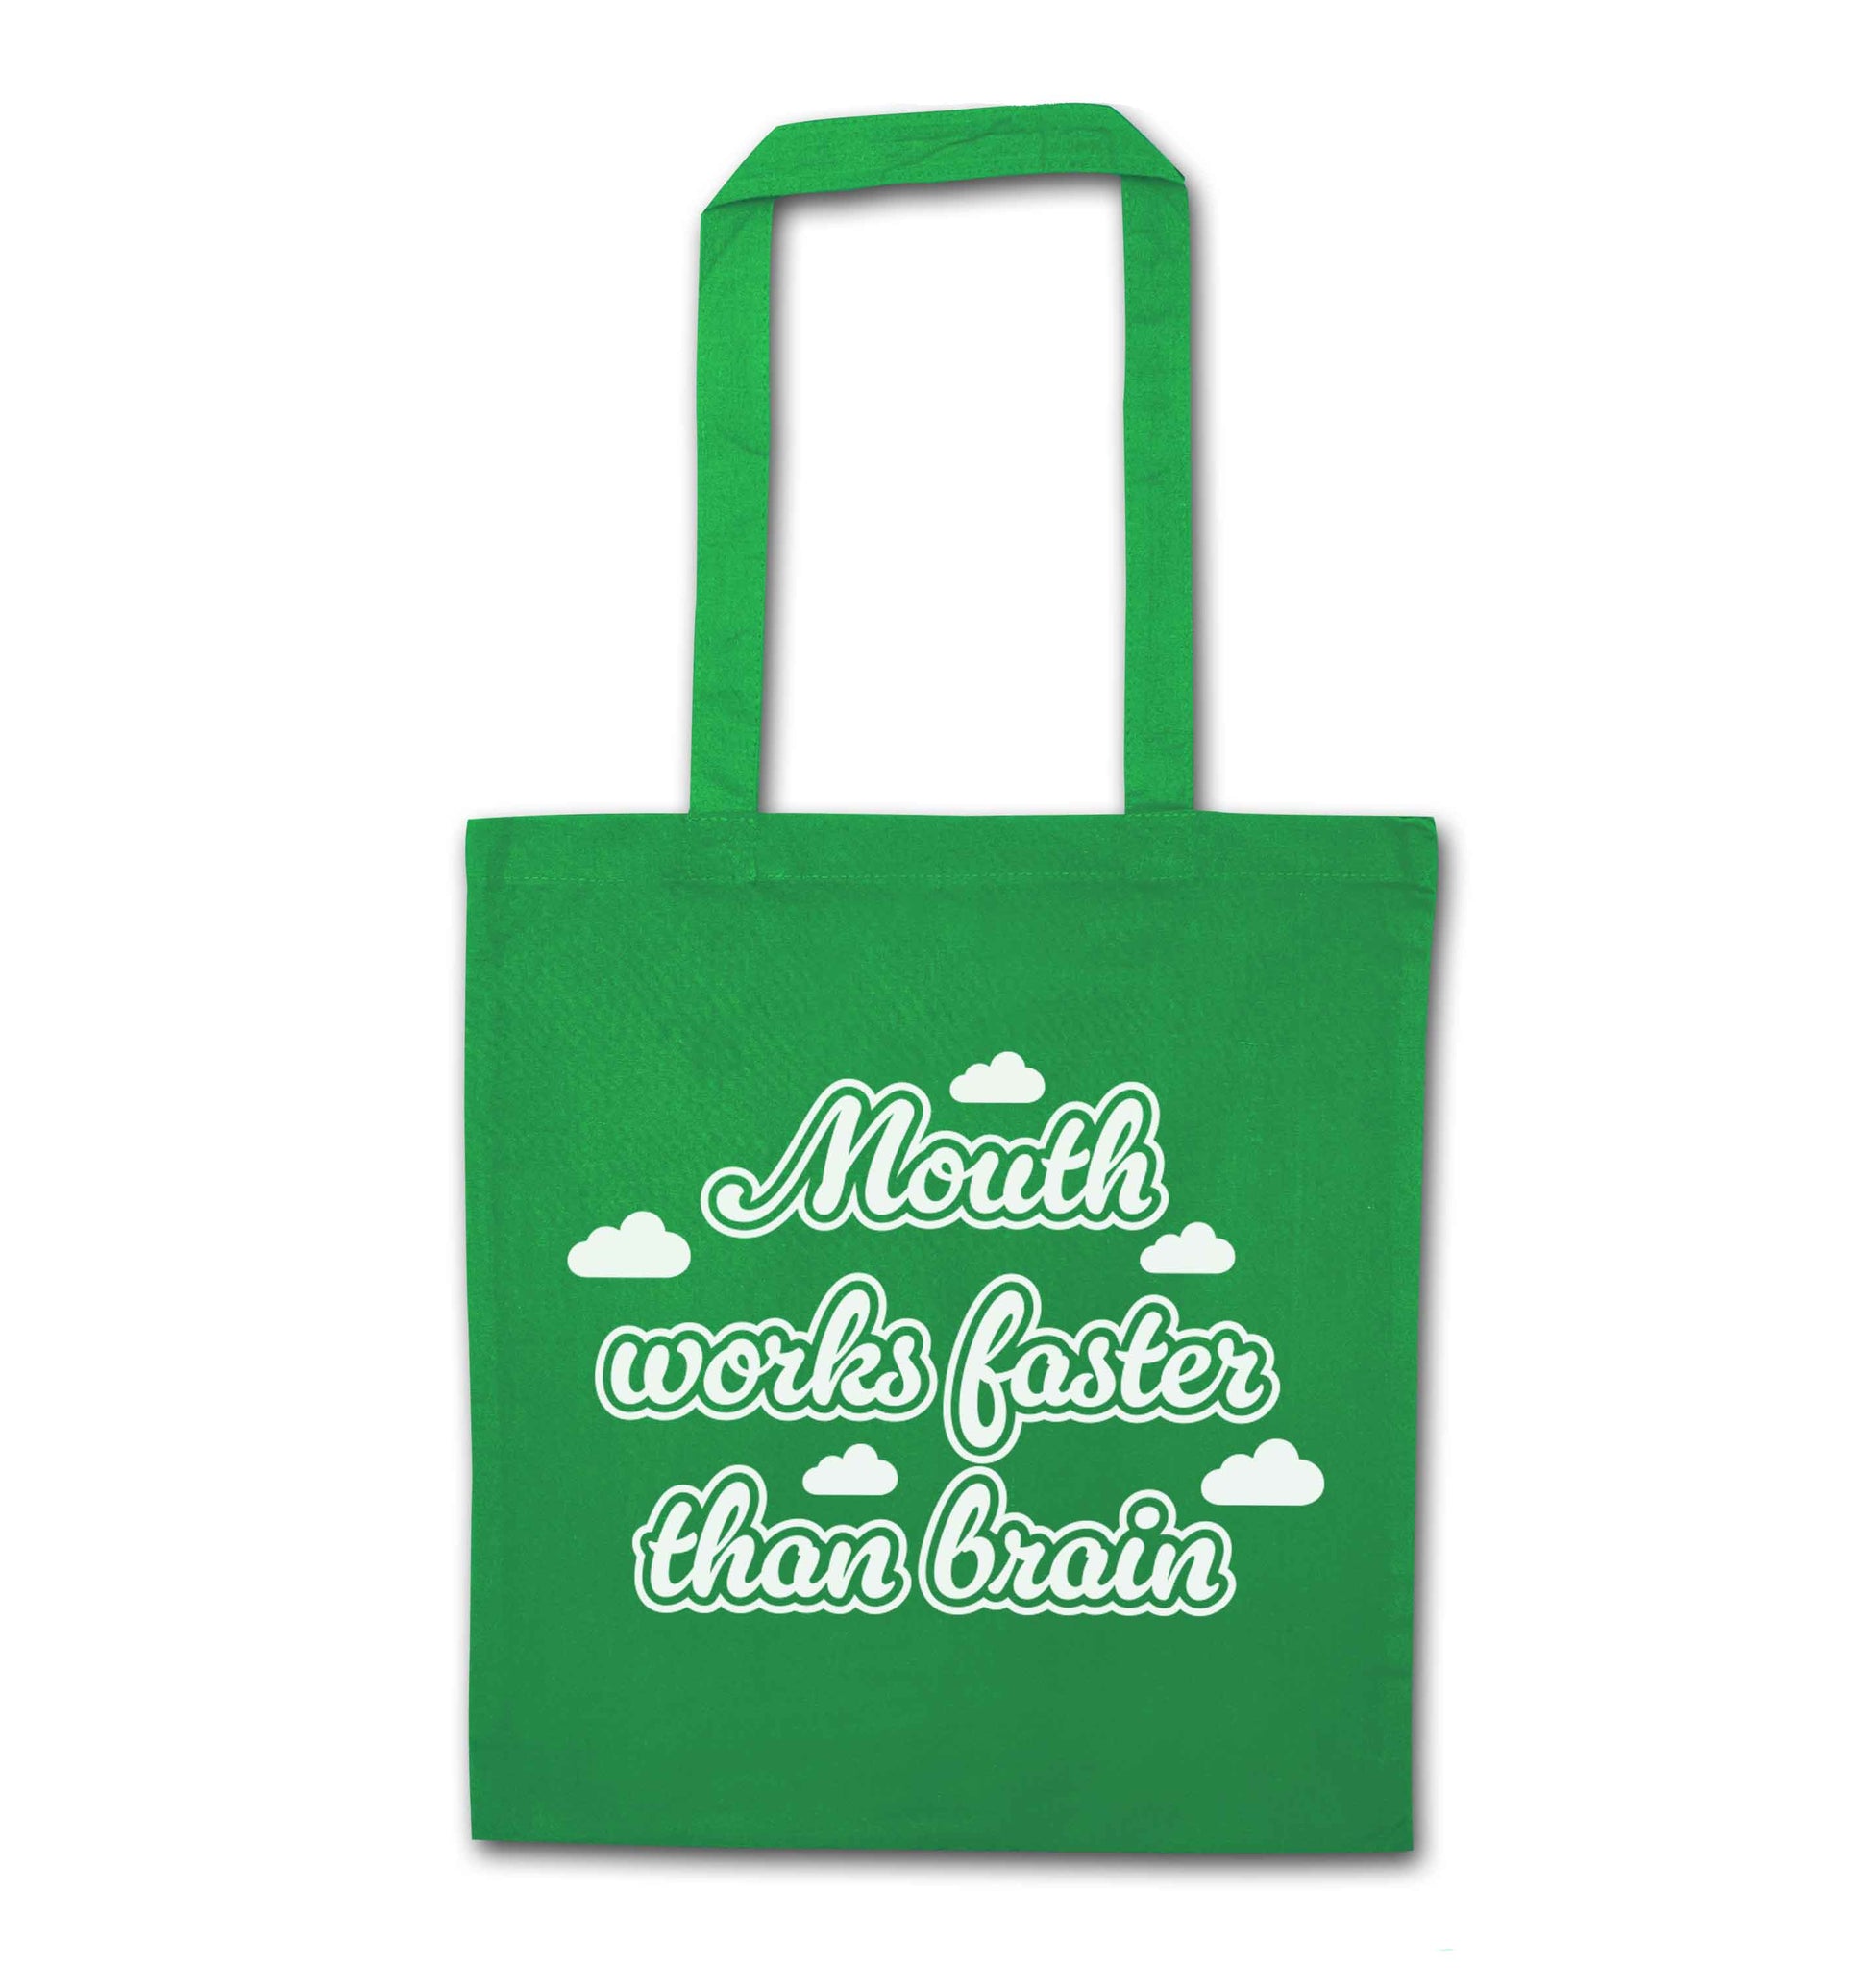 Mouth works faster than brain green tote bag